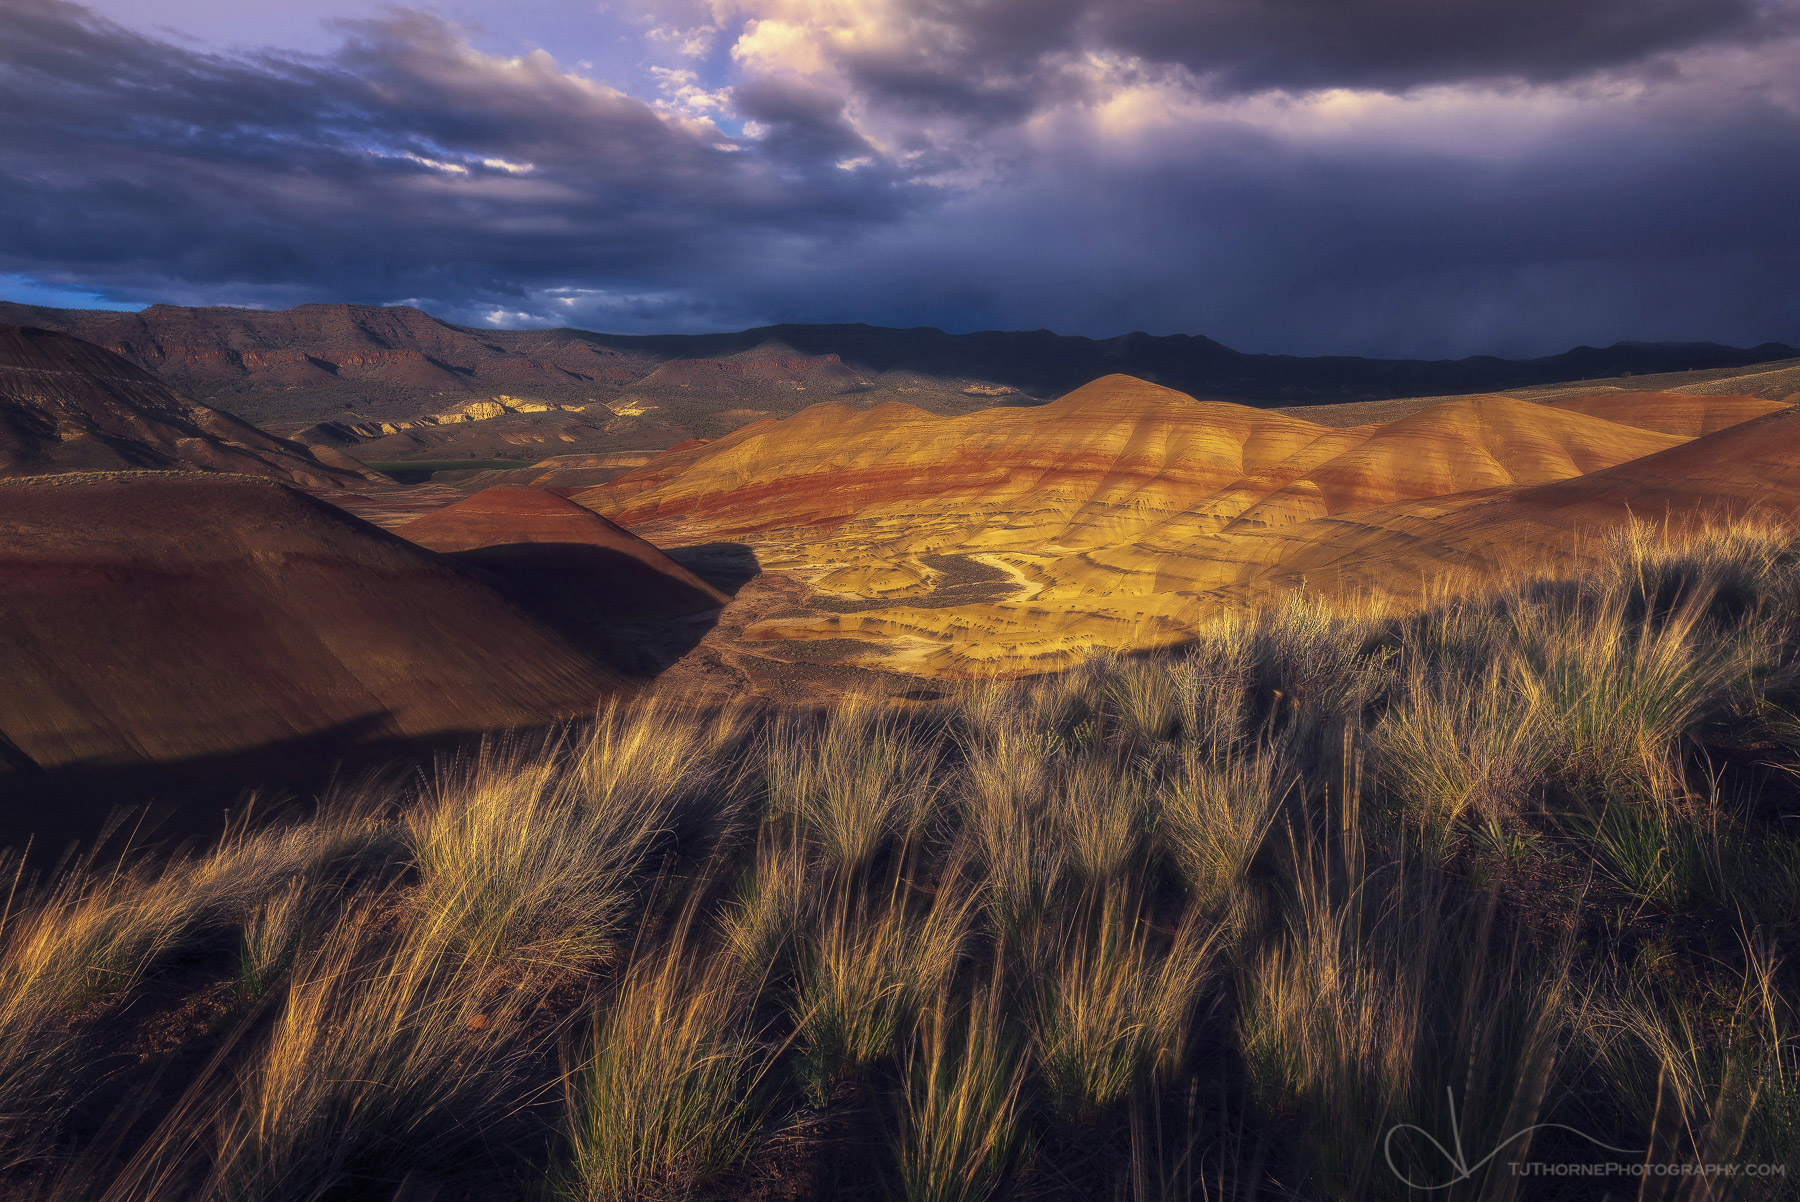 Sunset light falls on the Painted Hills, Oregon. Holy crap do I love Oregon. We have so much diversity so close. At the last...